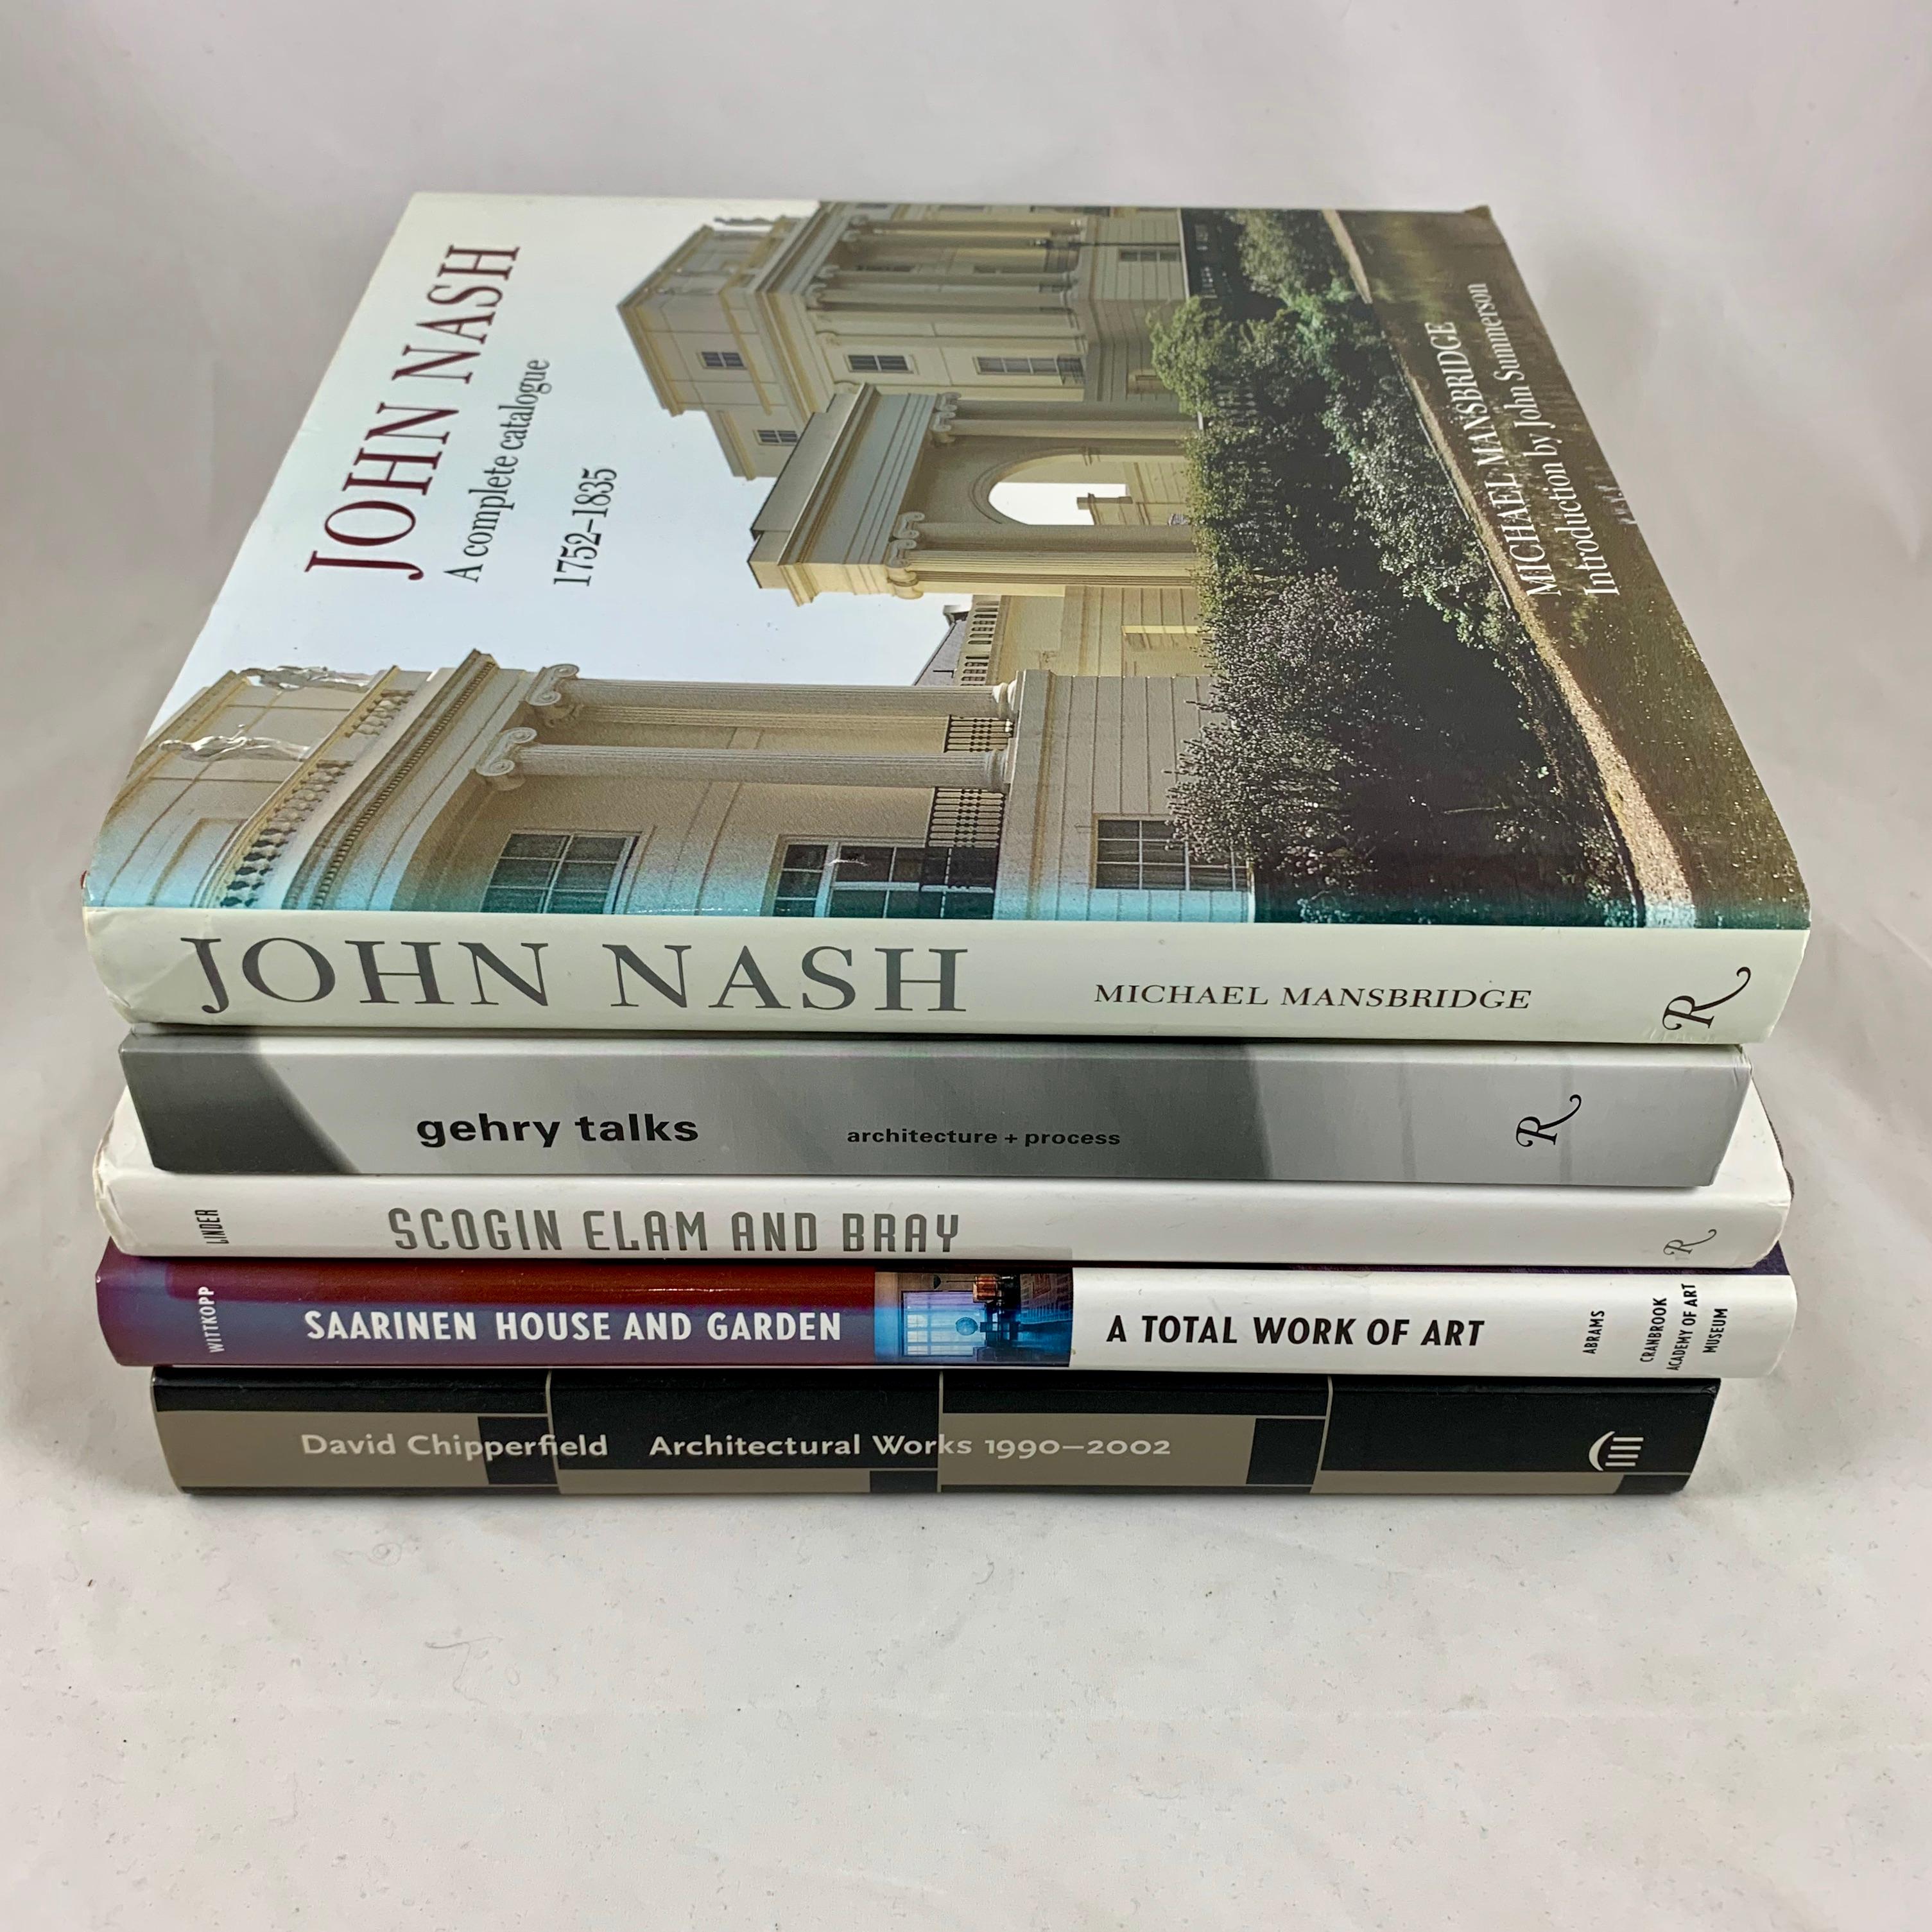 A collection of five hard-bound architecture books full of color photos, illustrations, and blueprints, covering the work of John Nash, Frank Gehry, Eero Saarinen, David Chipperfield, and the firm of Scogin, Elam & Bray.

John Nash – A complete